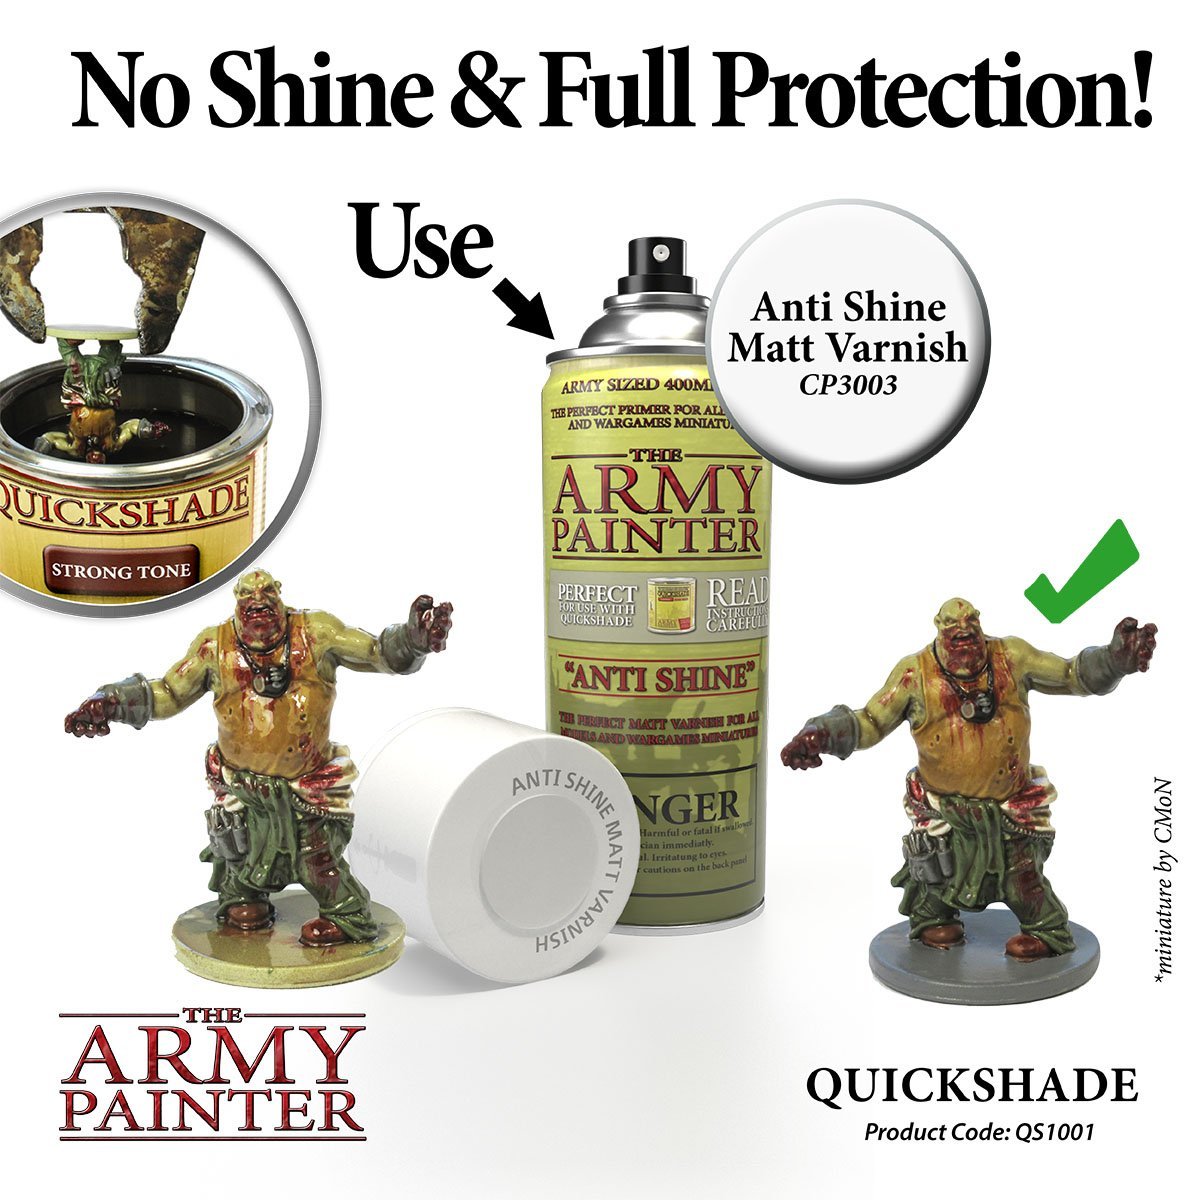 The Army Painter - Quickshade Dips: Soft Tone (250ml)